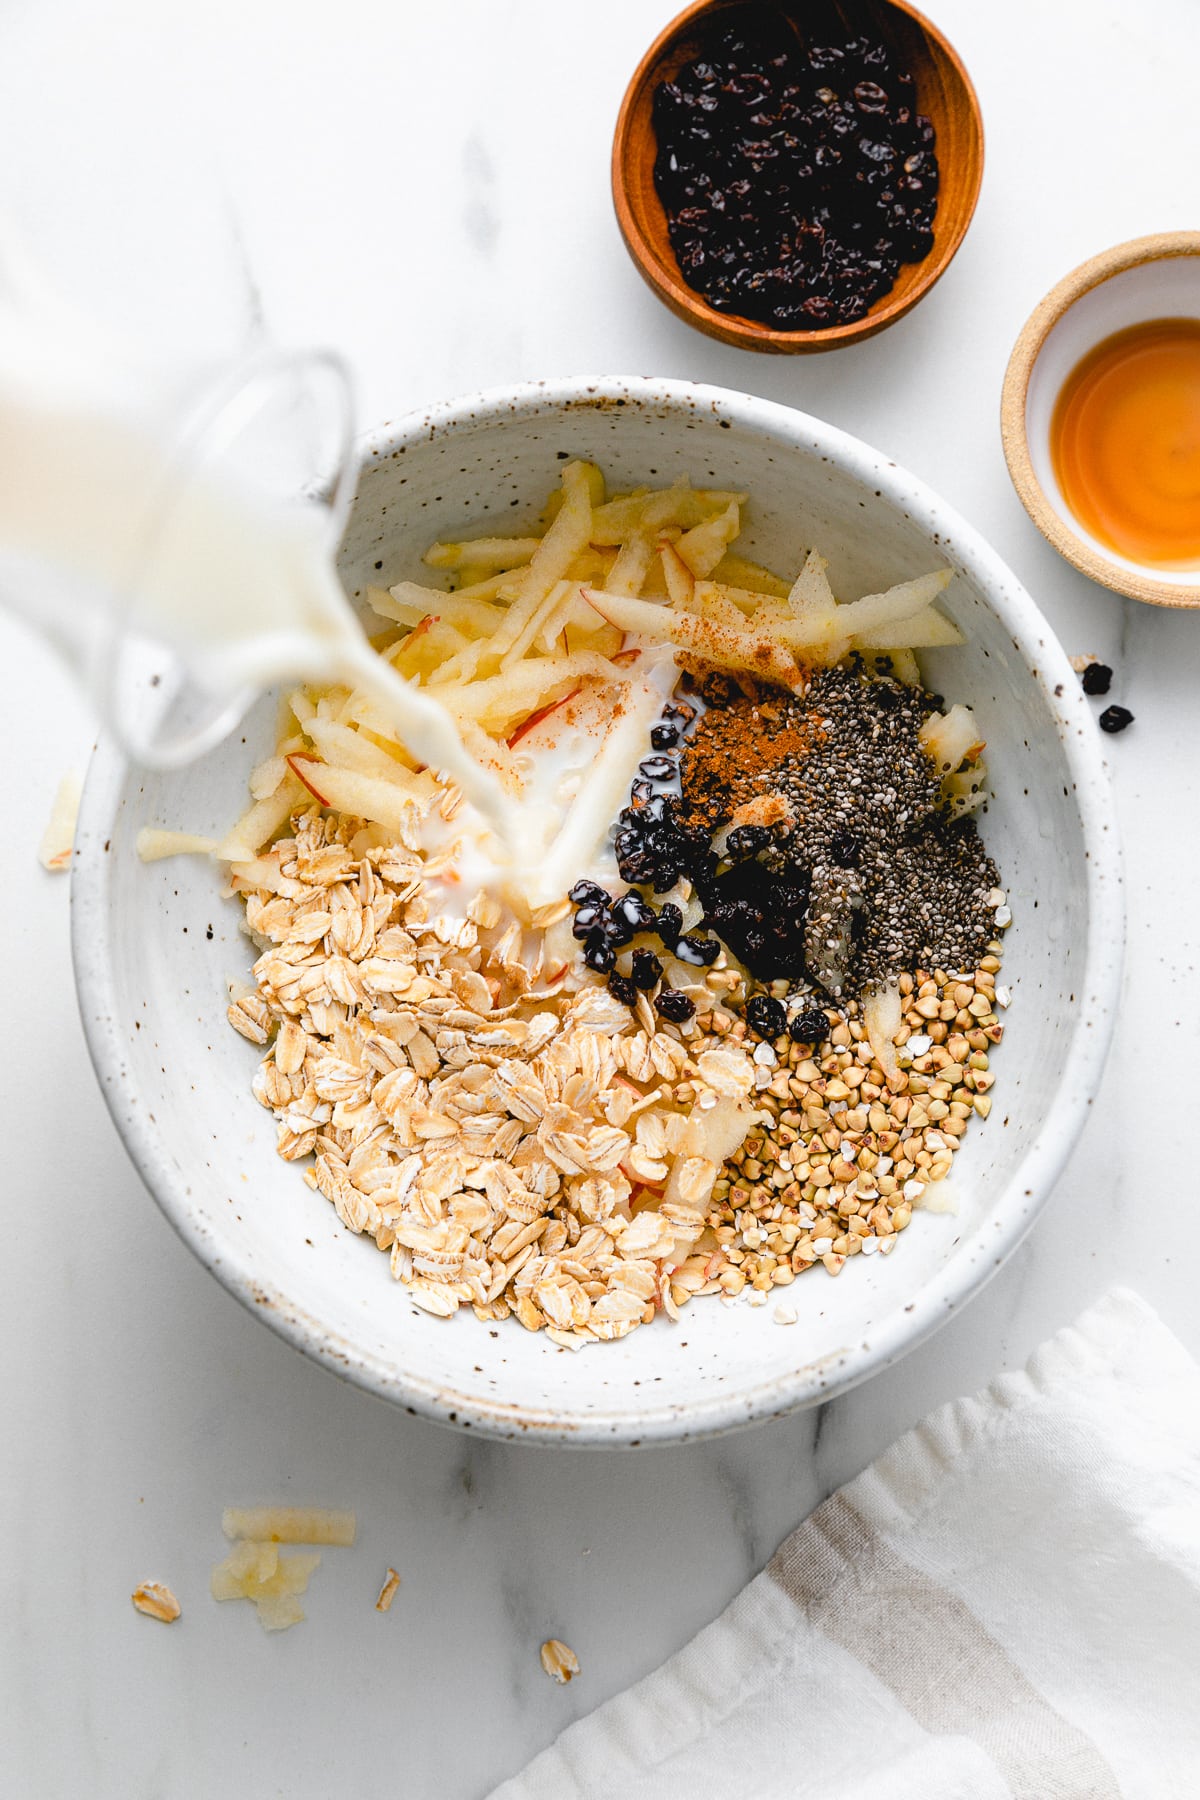 top down view showing the process of making healthy bircher muesli in a bowl.